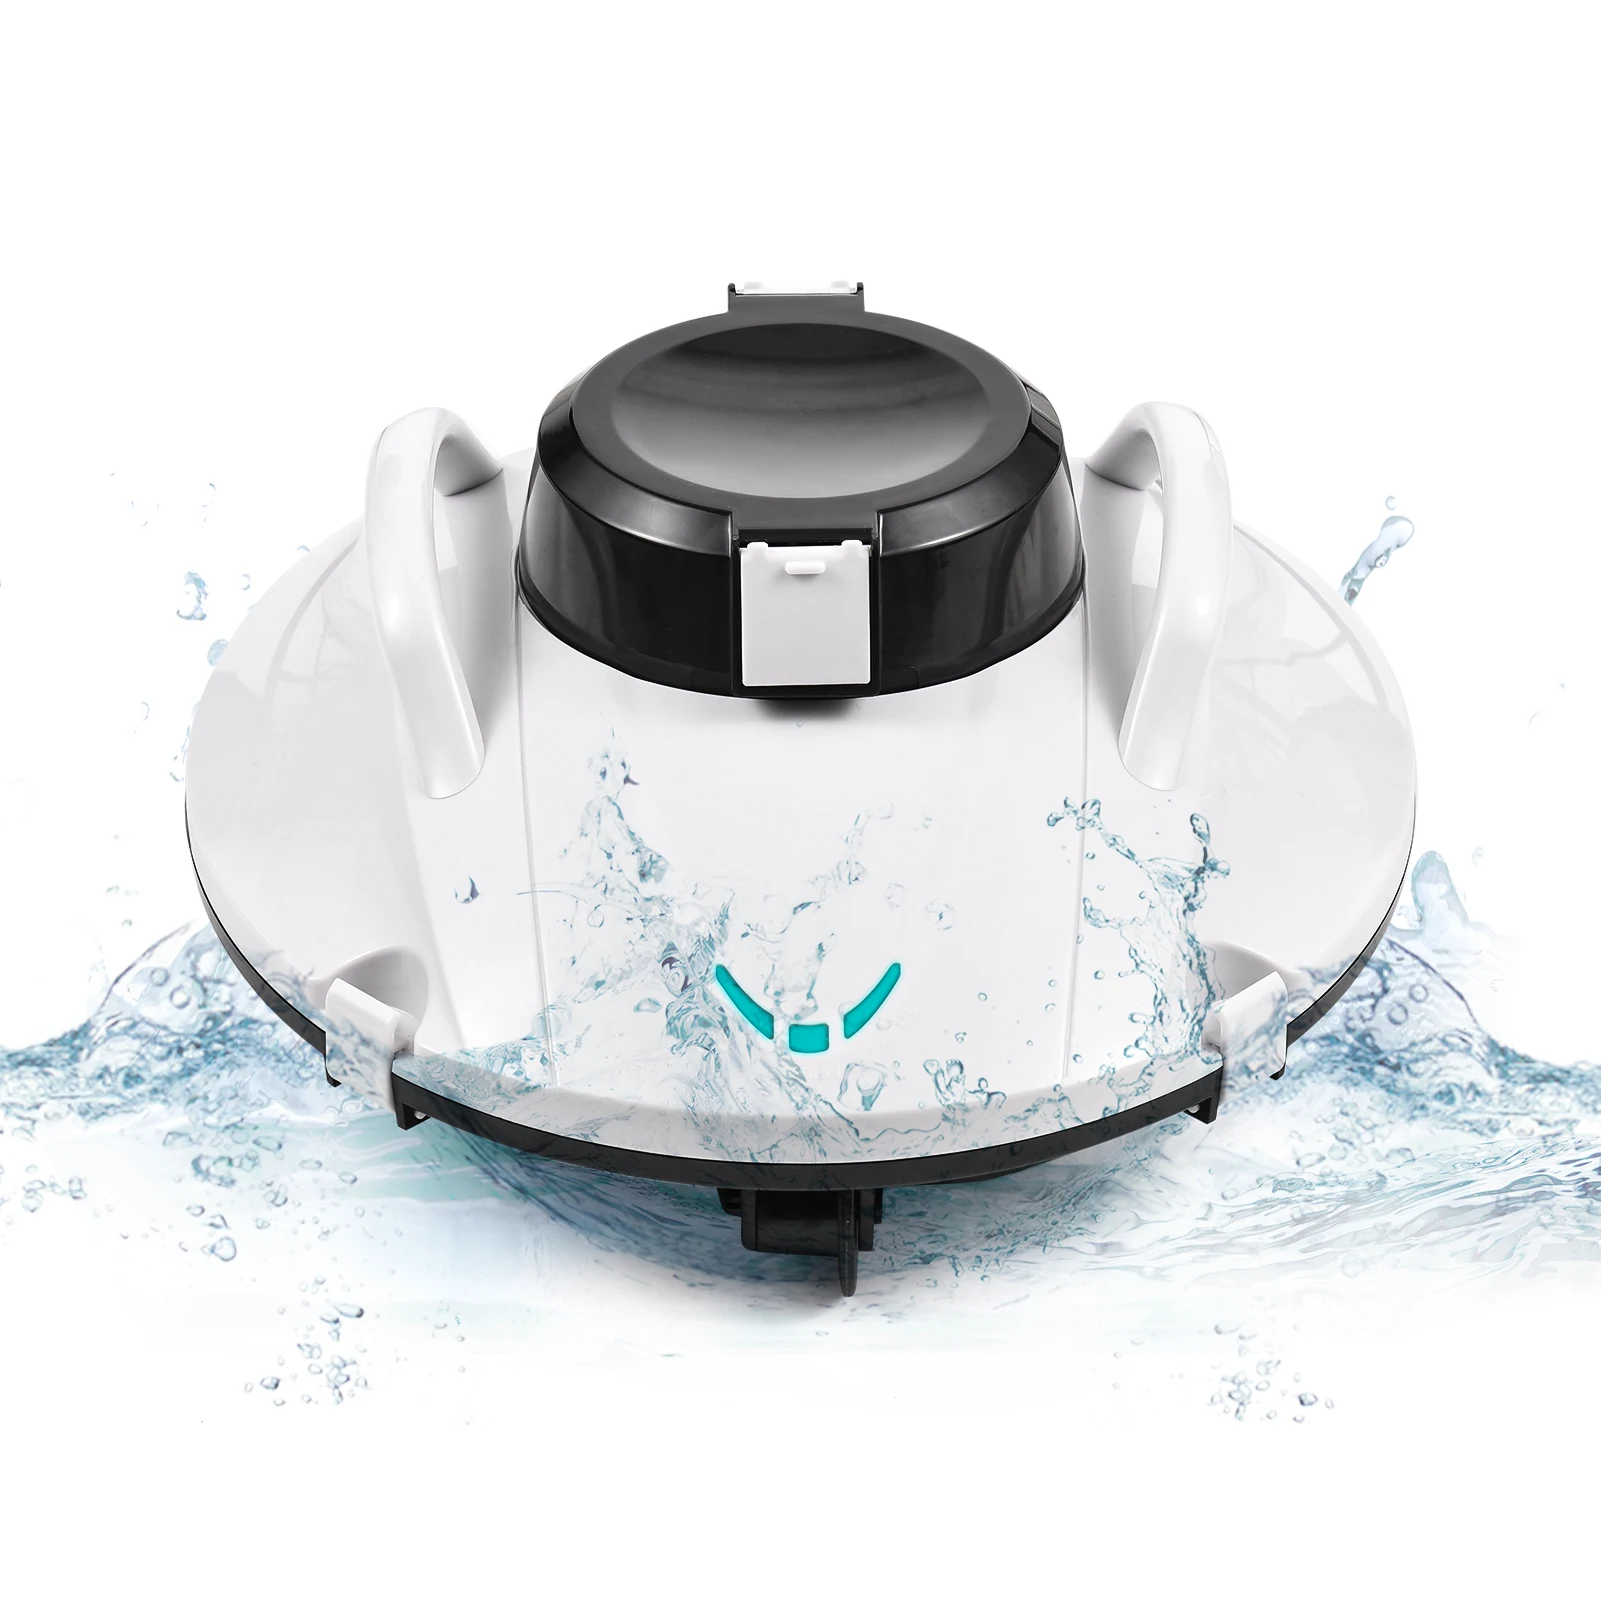 

Pool Vacuum Cordless Robotic Pool Cleaner 35W Powerful Suction Lasts 90 Mins with LED Indicator Support Self-Parking